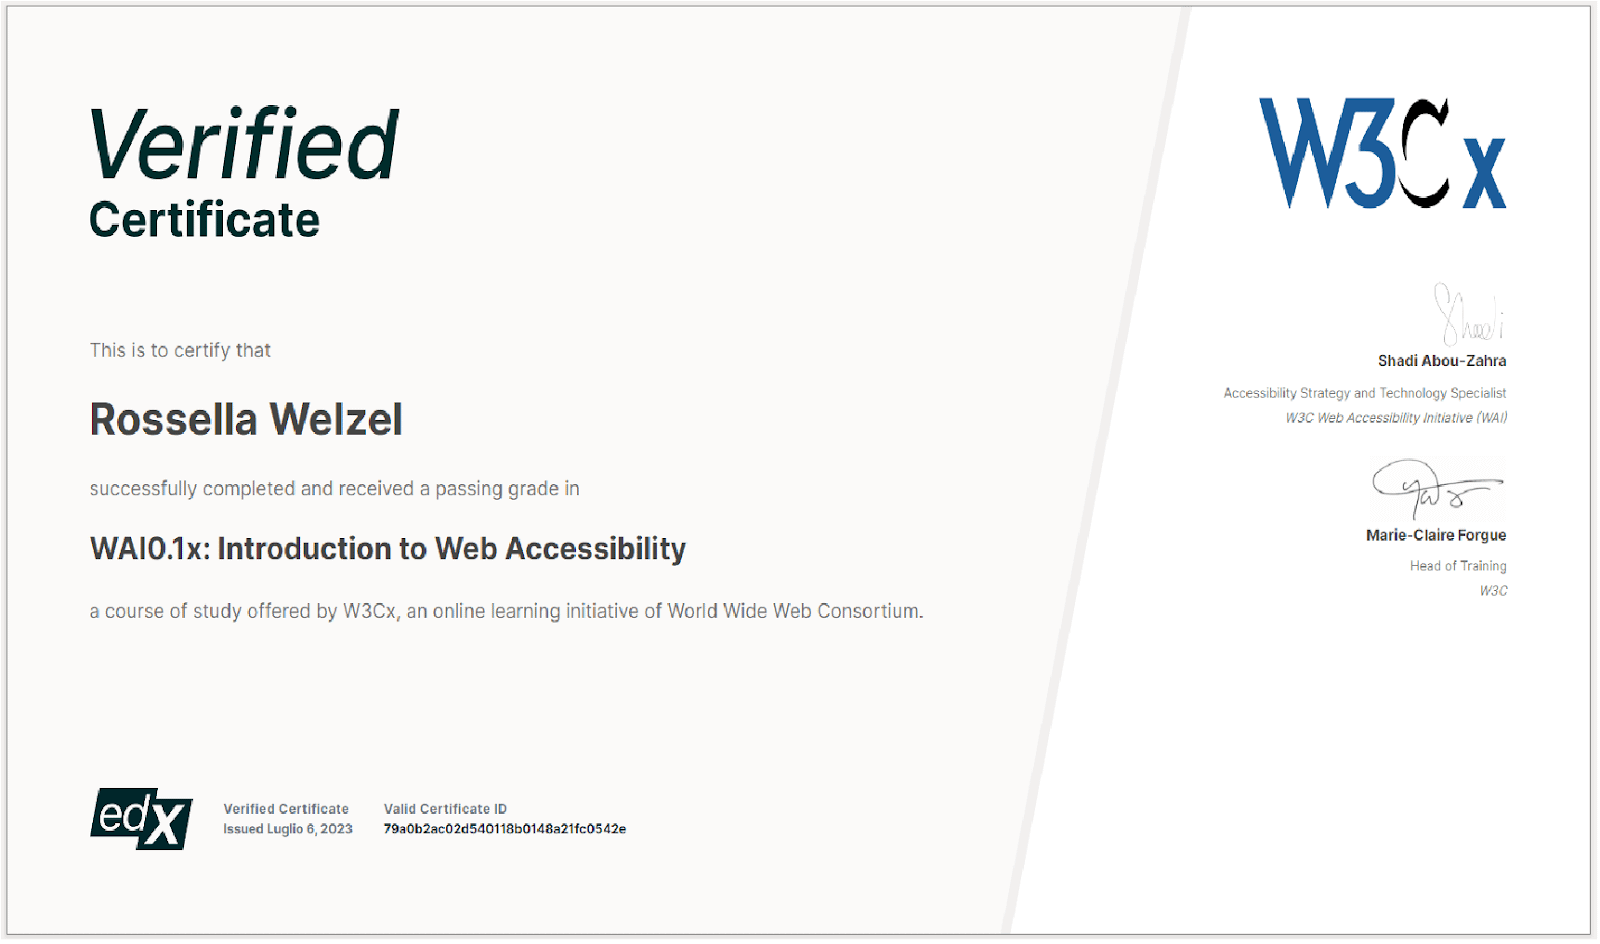 Certificate of completion to Rossella Welzel for W3C Course on Web Accessibility